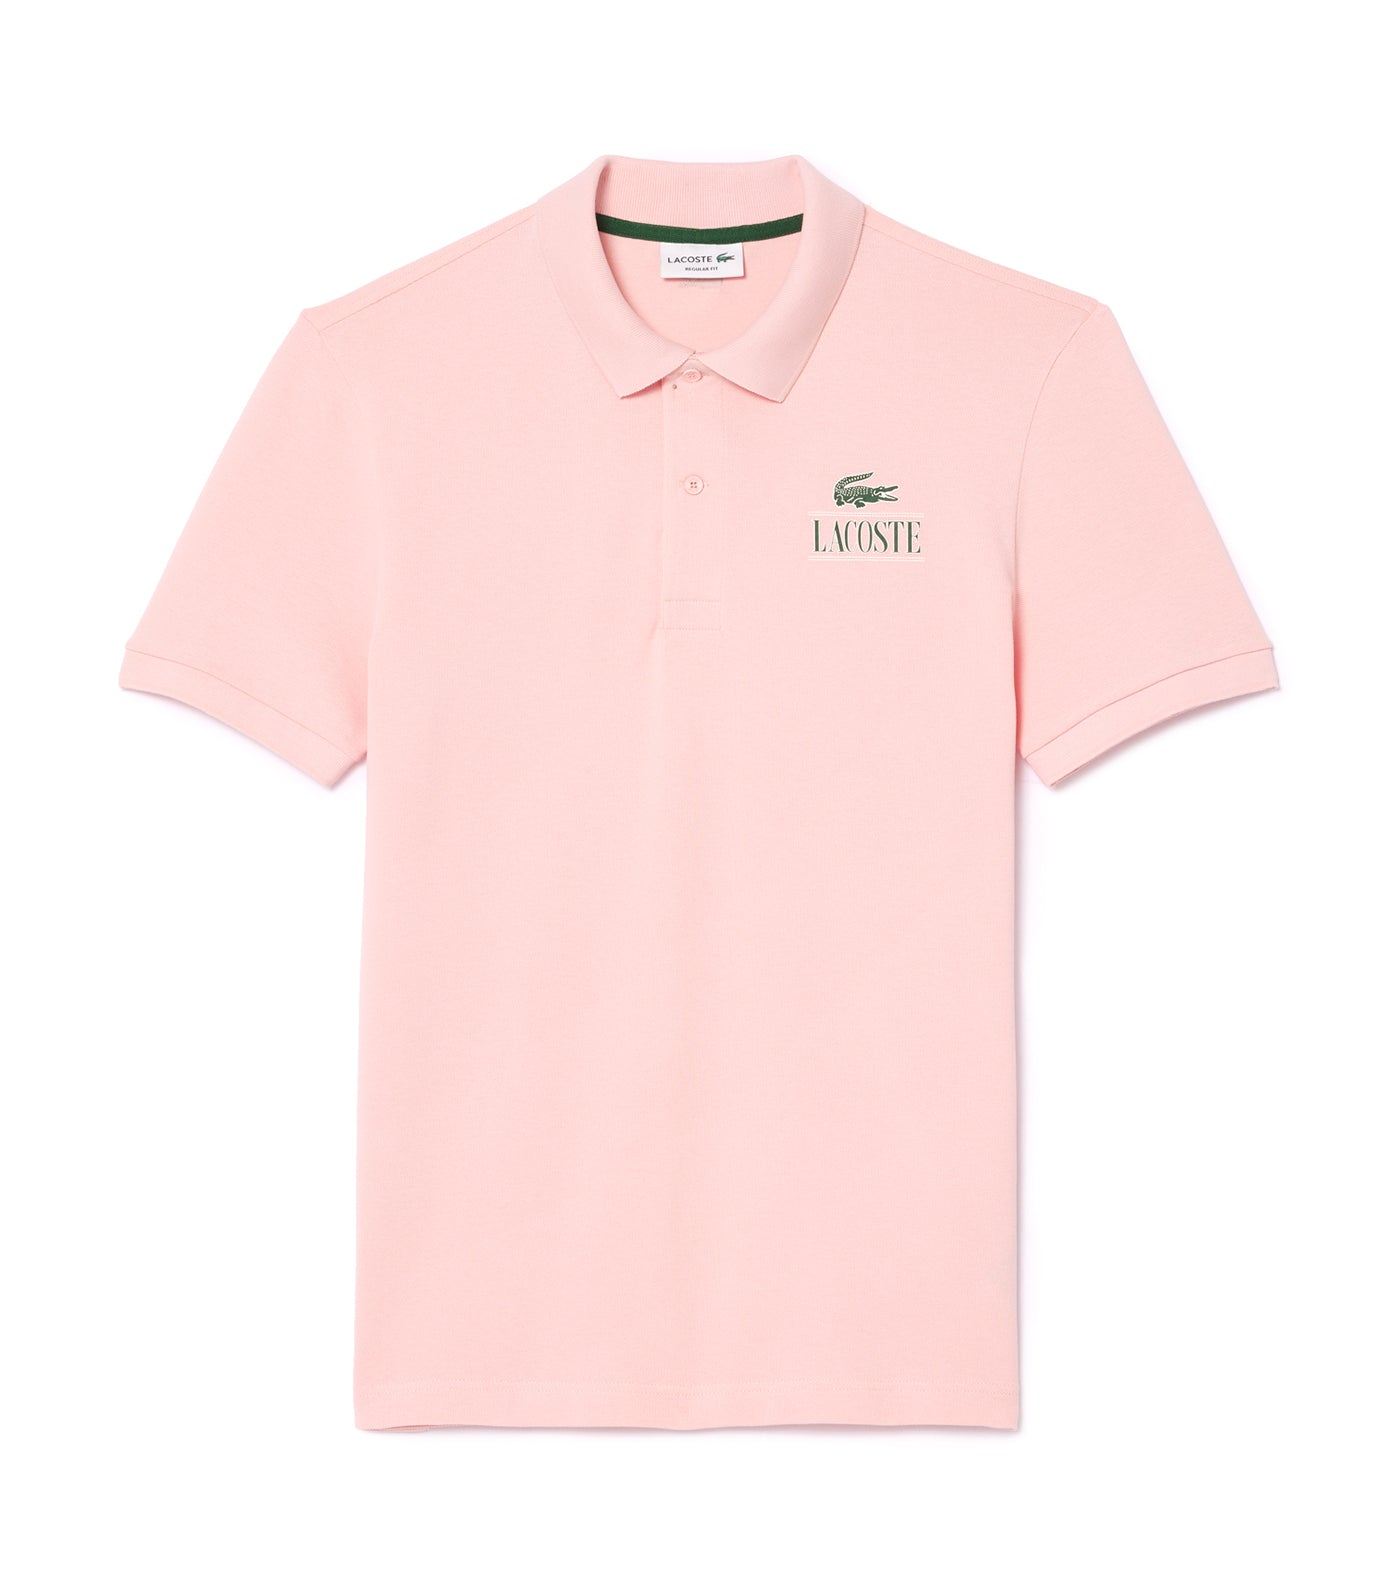 Lacoste Signature Print Stretch Piqué Polo Shirt Waterlily